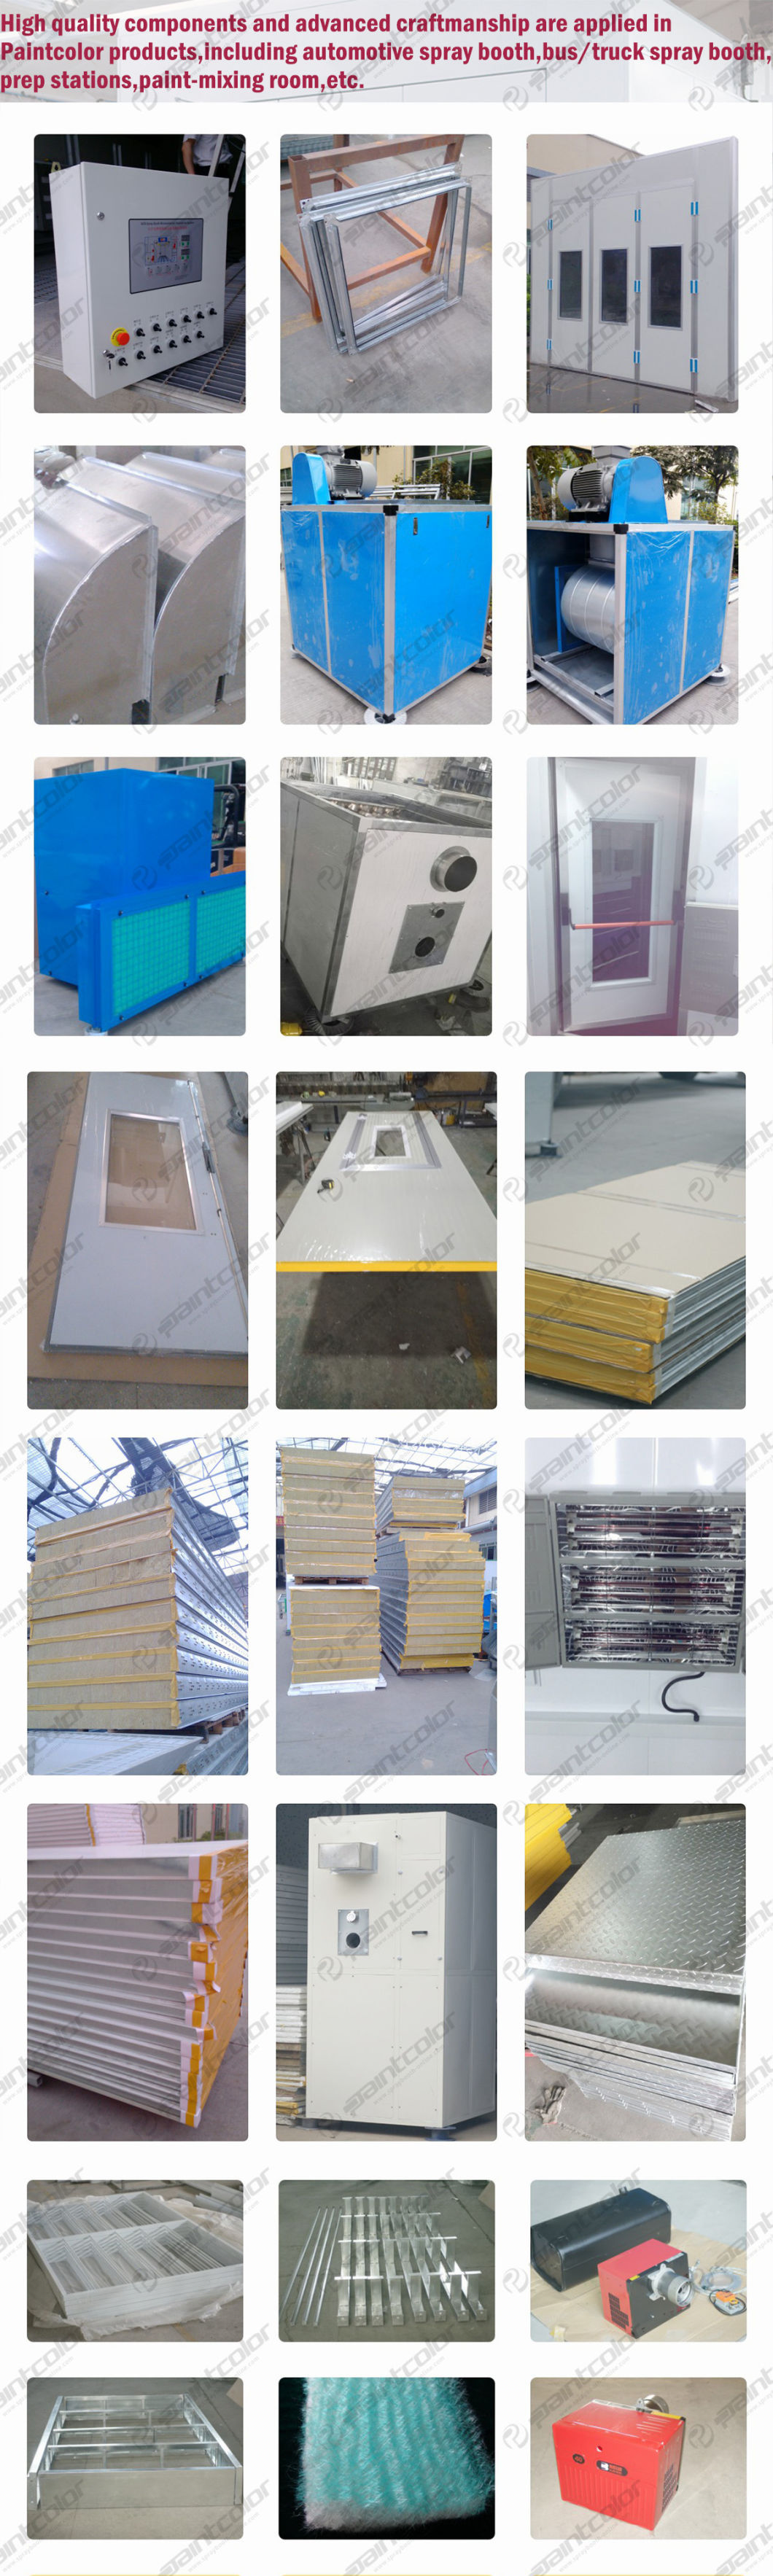 Paintcolor Brand Automotive Paint Chamber Drying Chamber Paint Booth with Heat Recovery System